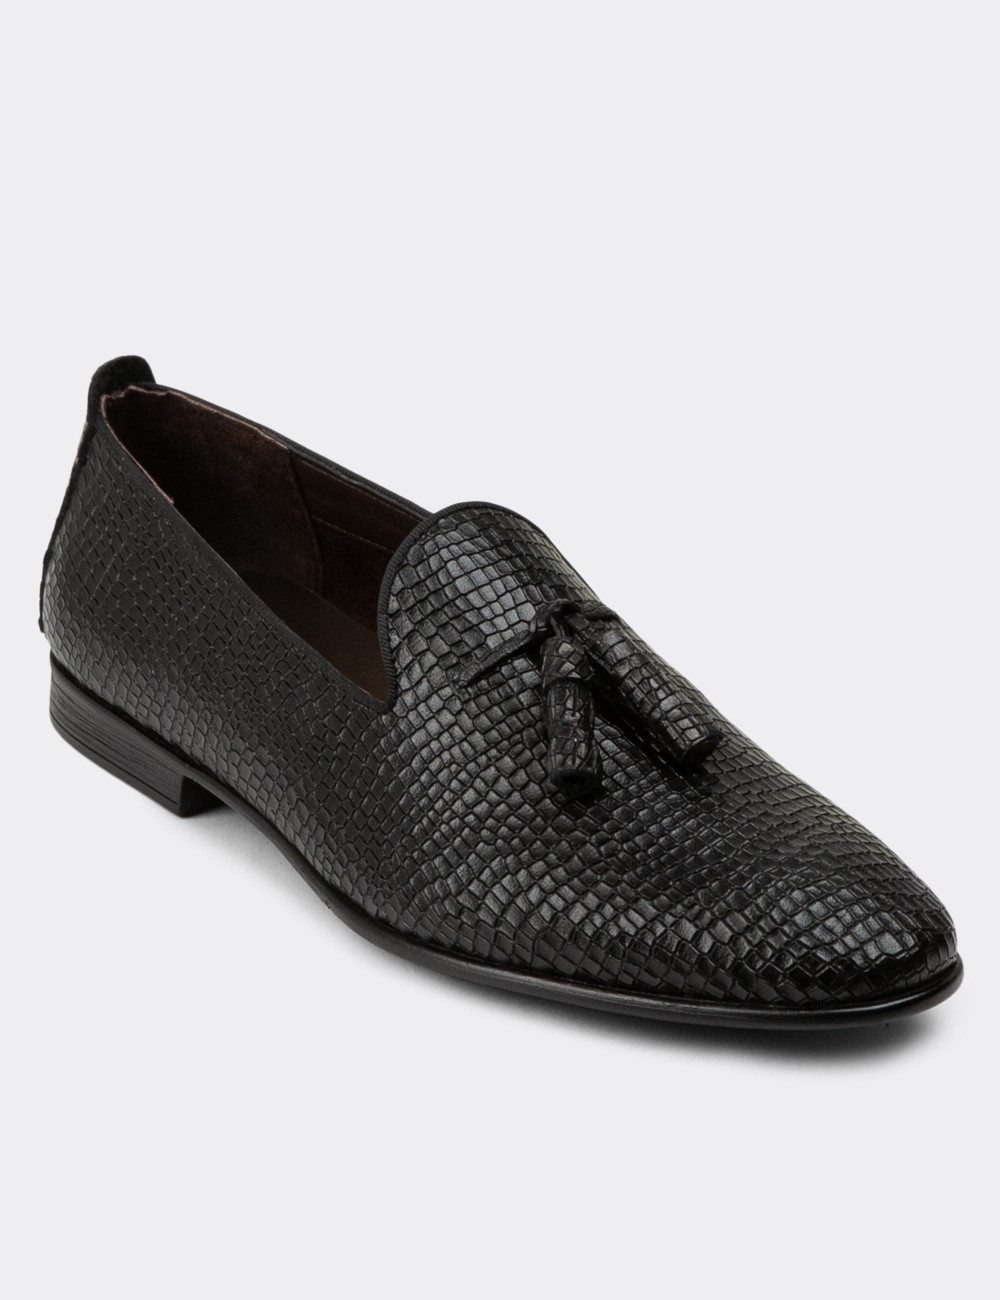 Black Leather Loafers - 01702MSYHC09